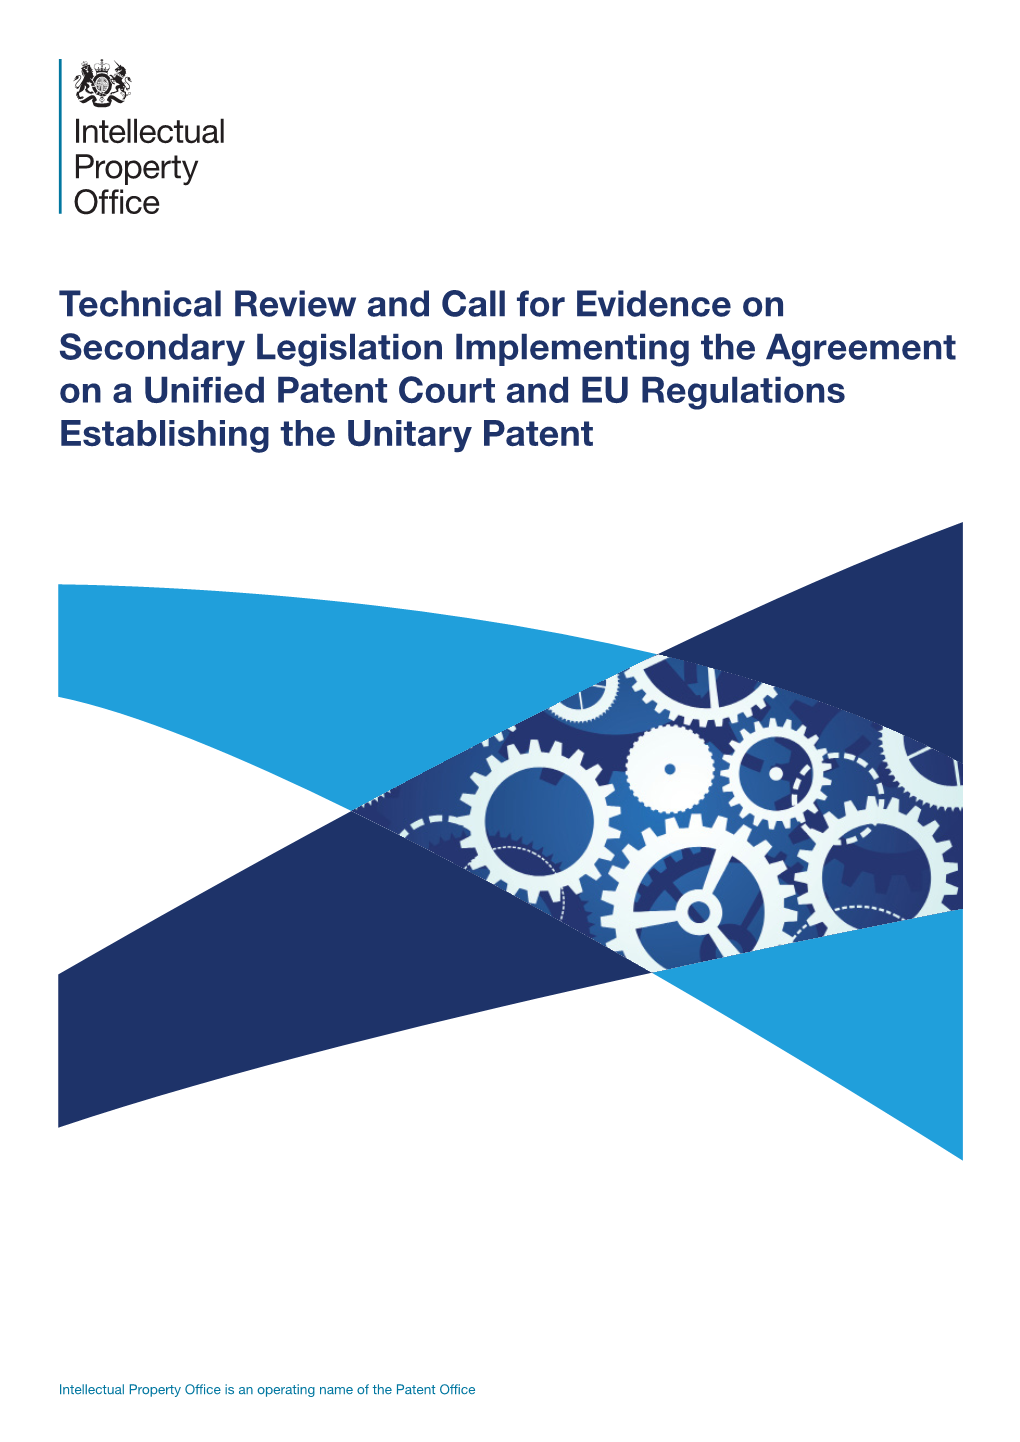 Technical Review / Unified Patents Court